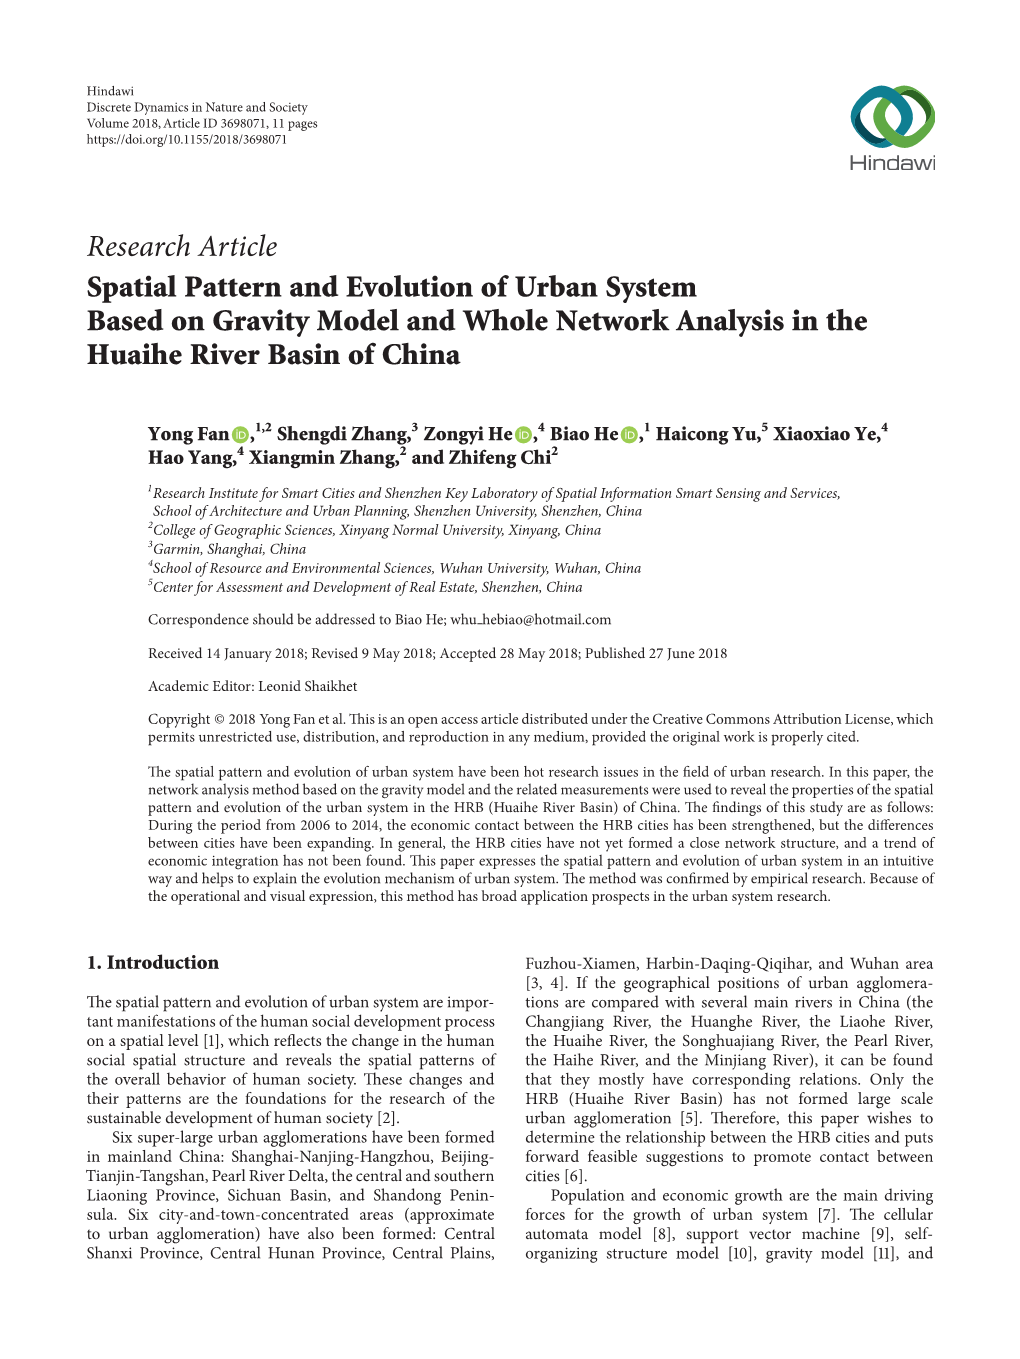 Spatial Pattern and Evolution of Urban System Based on Gravity Model and Whole Network Analysis in the Huaihe River Basin of China